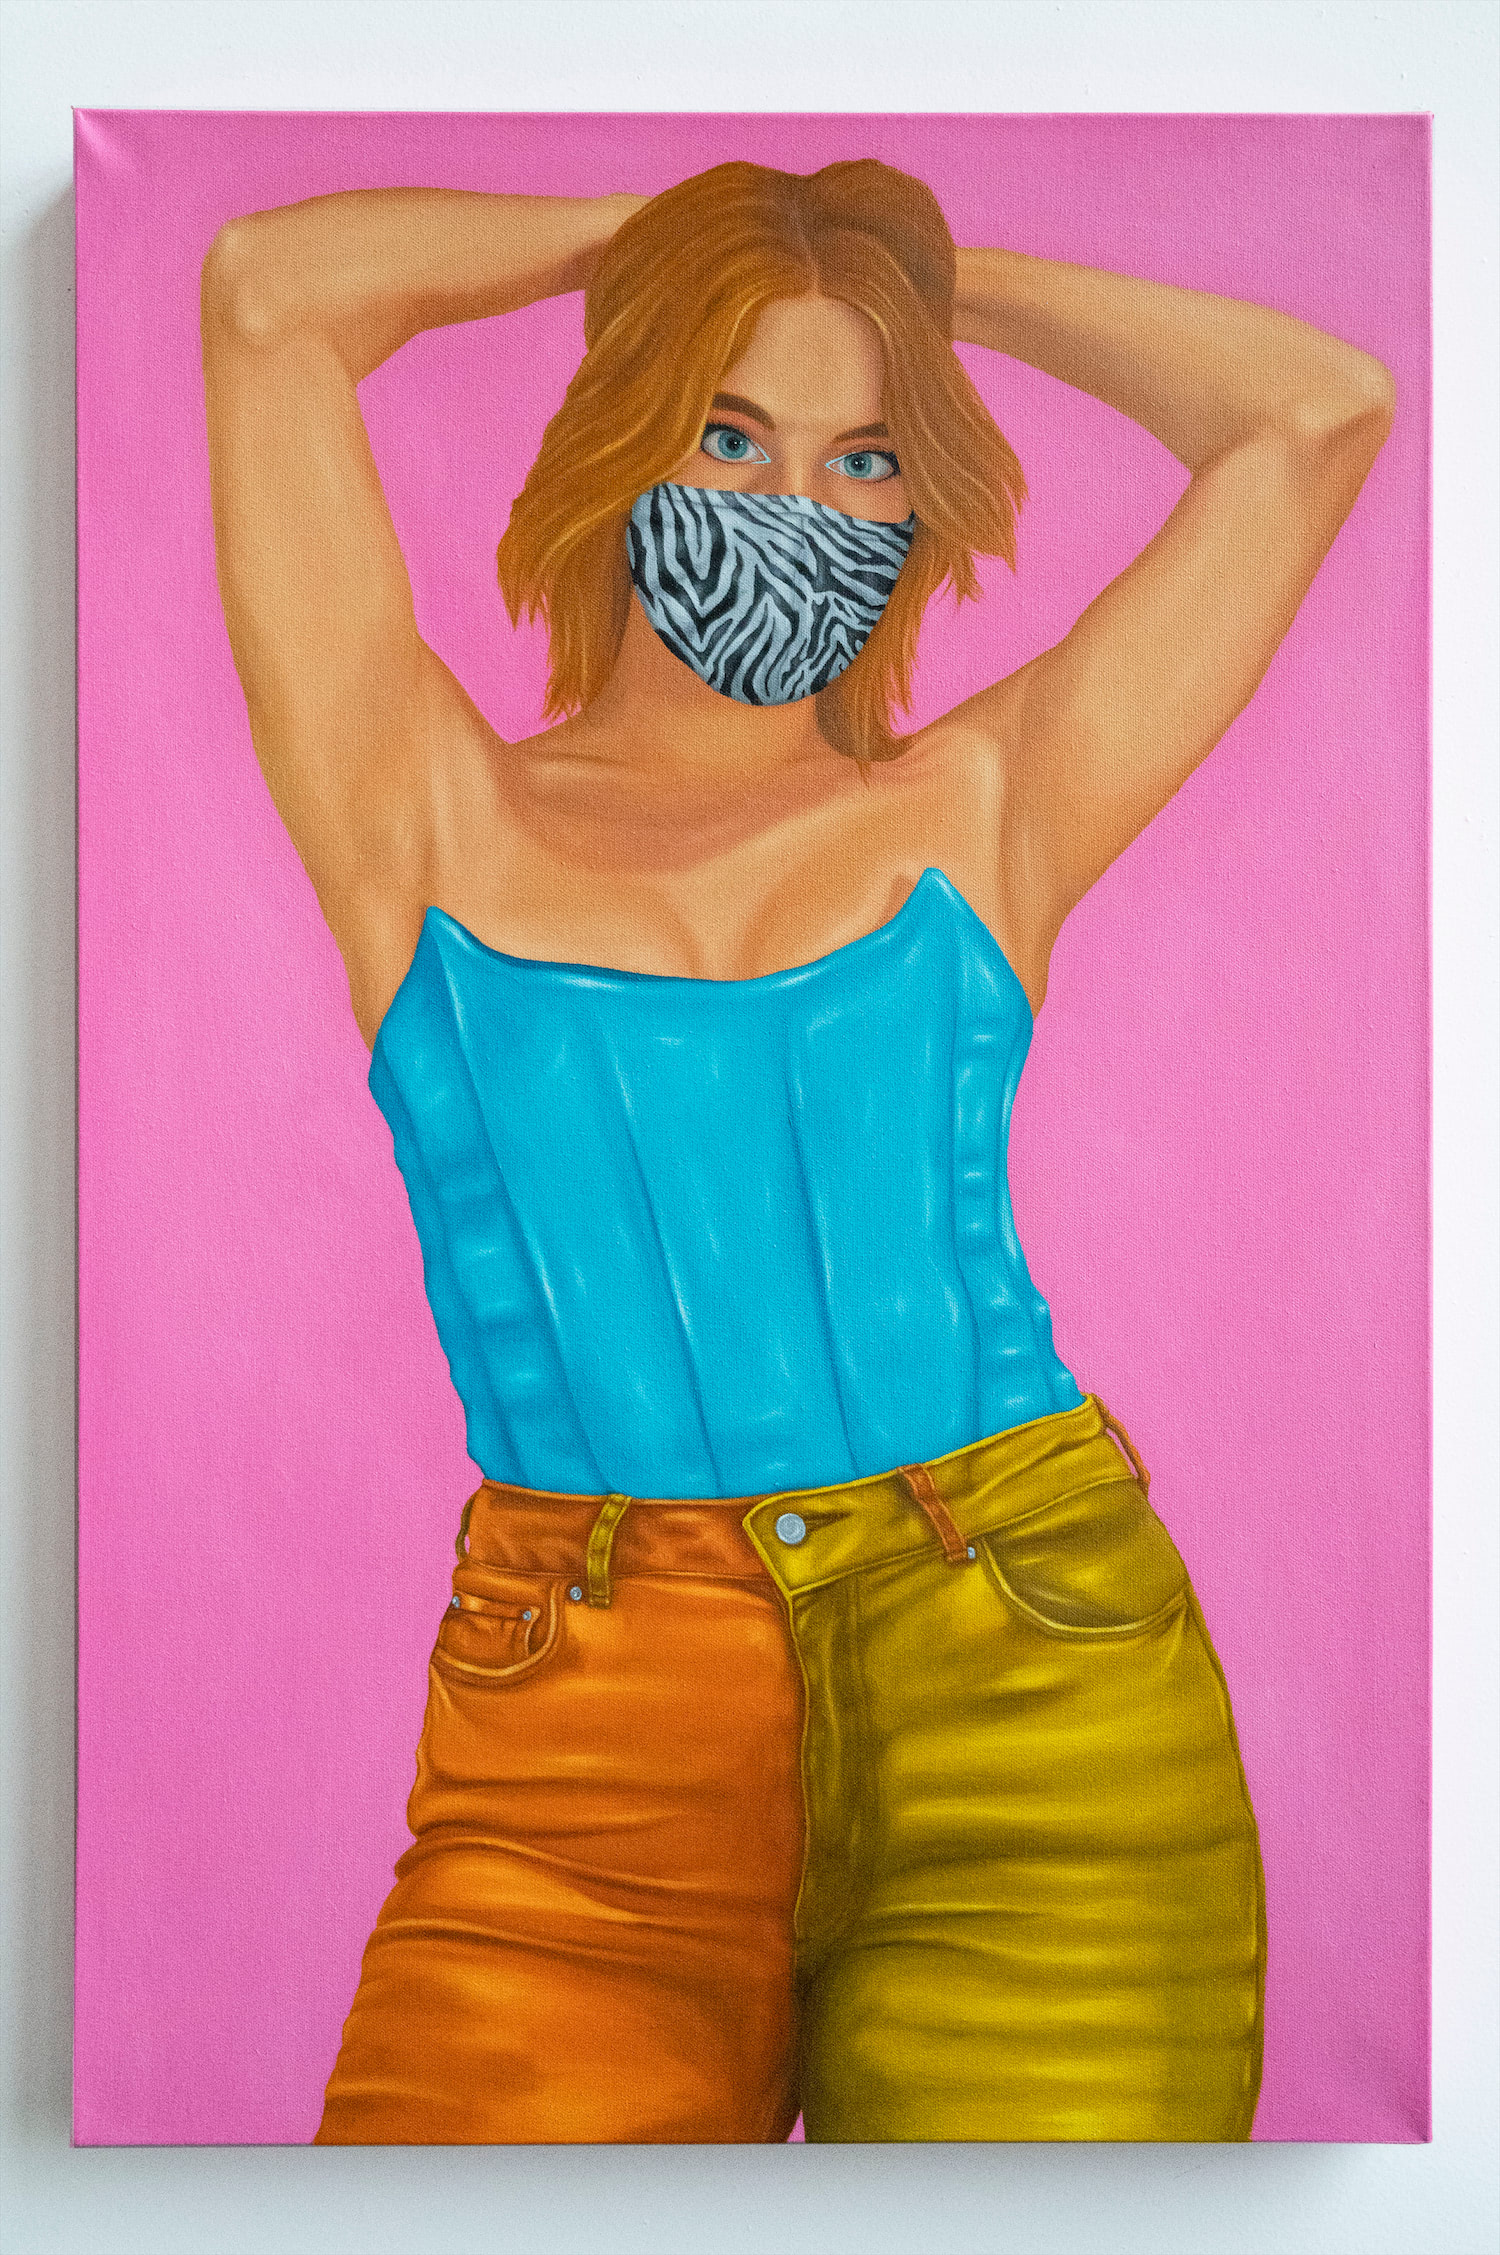 Sophie wearing a sky blue latex corset and orange and yellow color blocked jeans, accessorized with a zebra patterned mask.